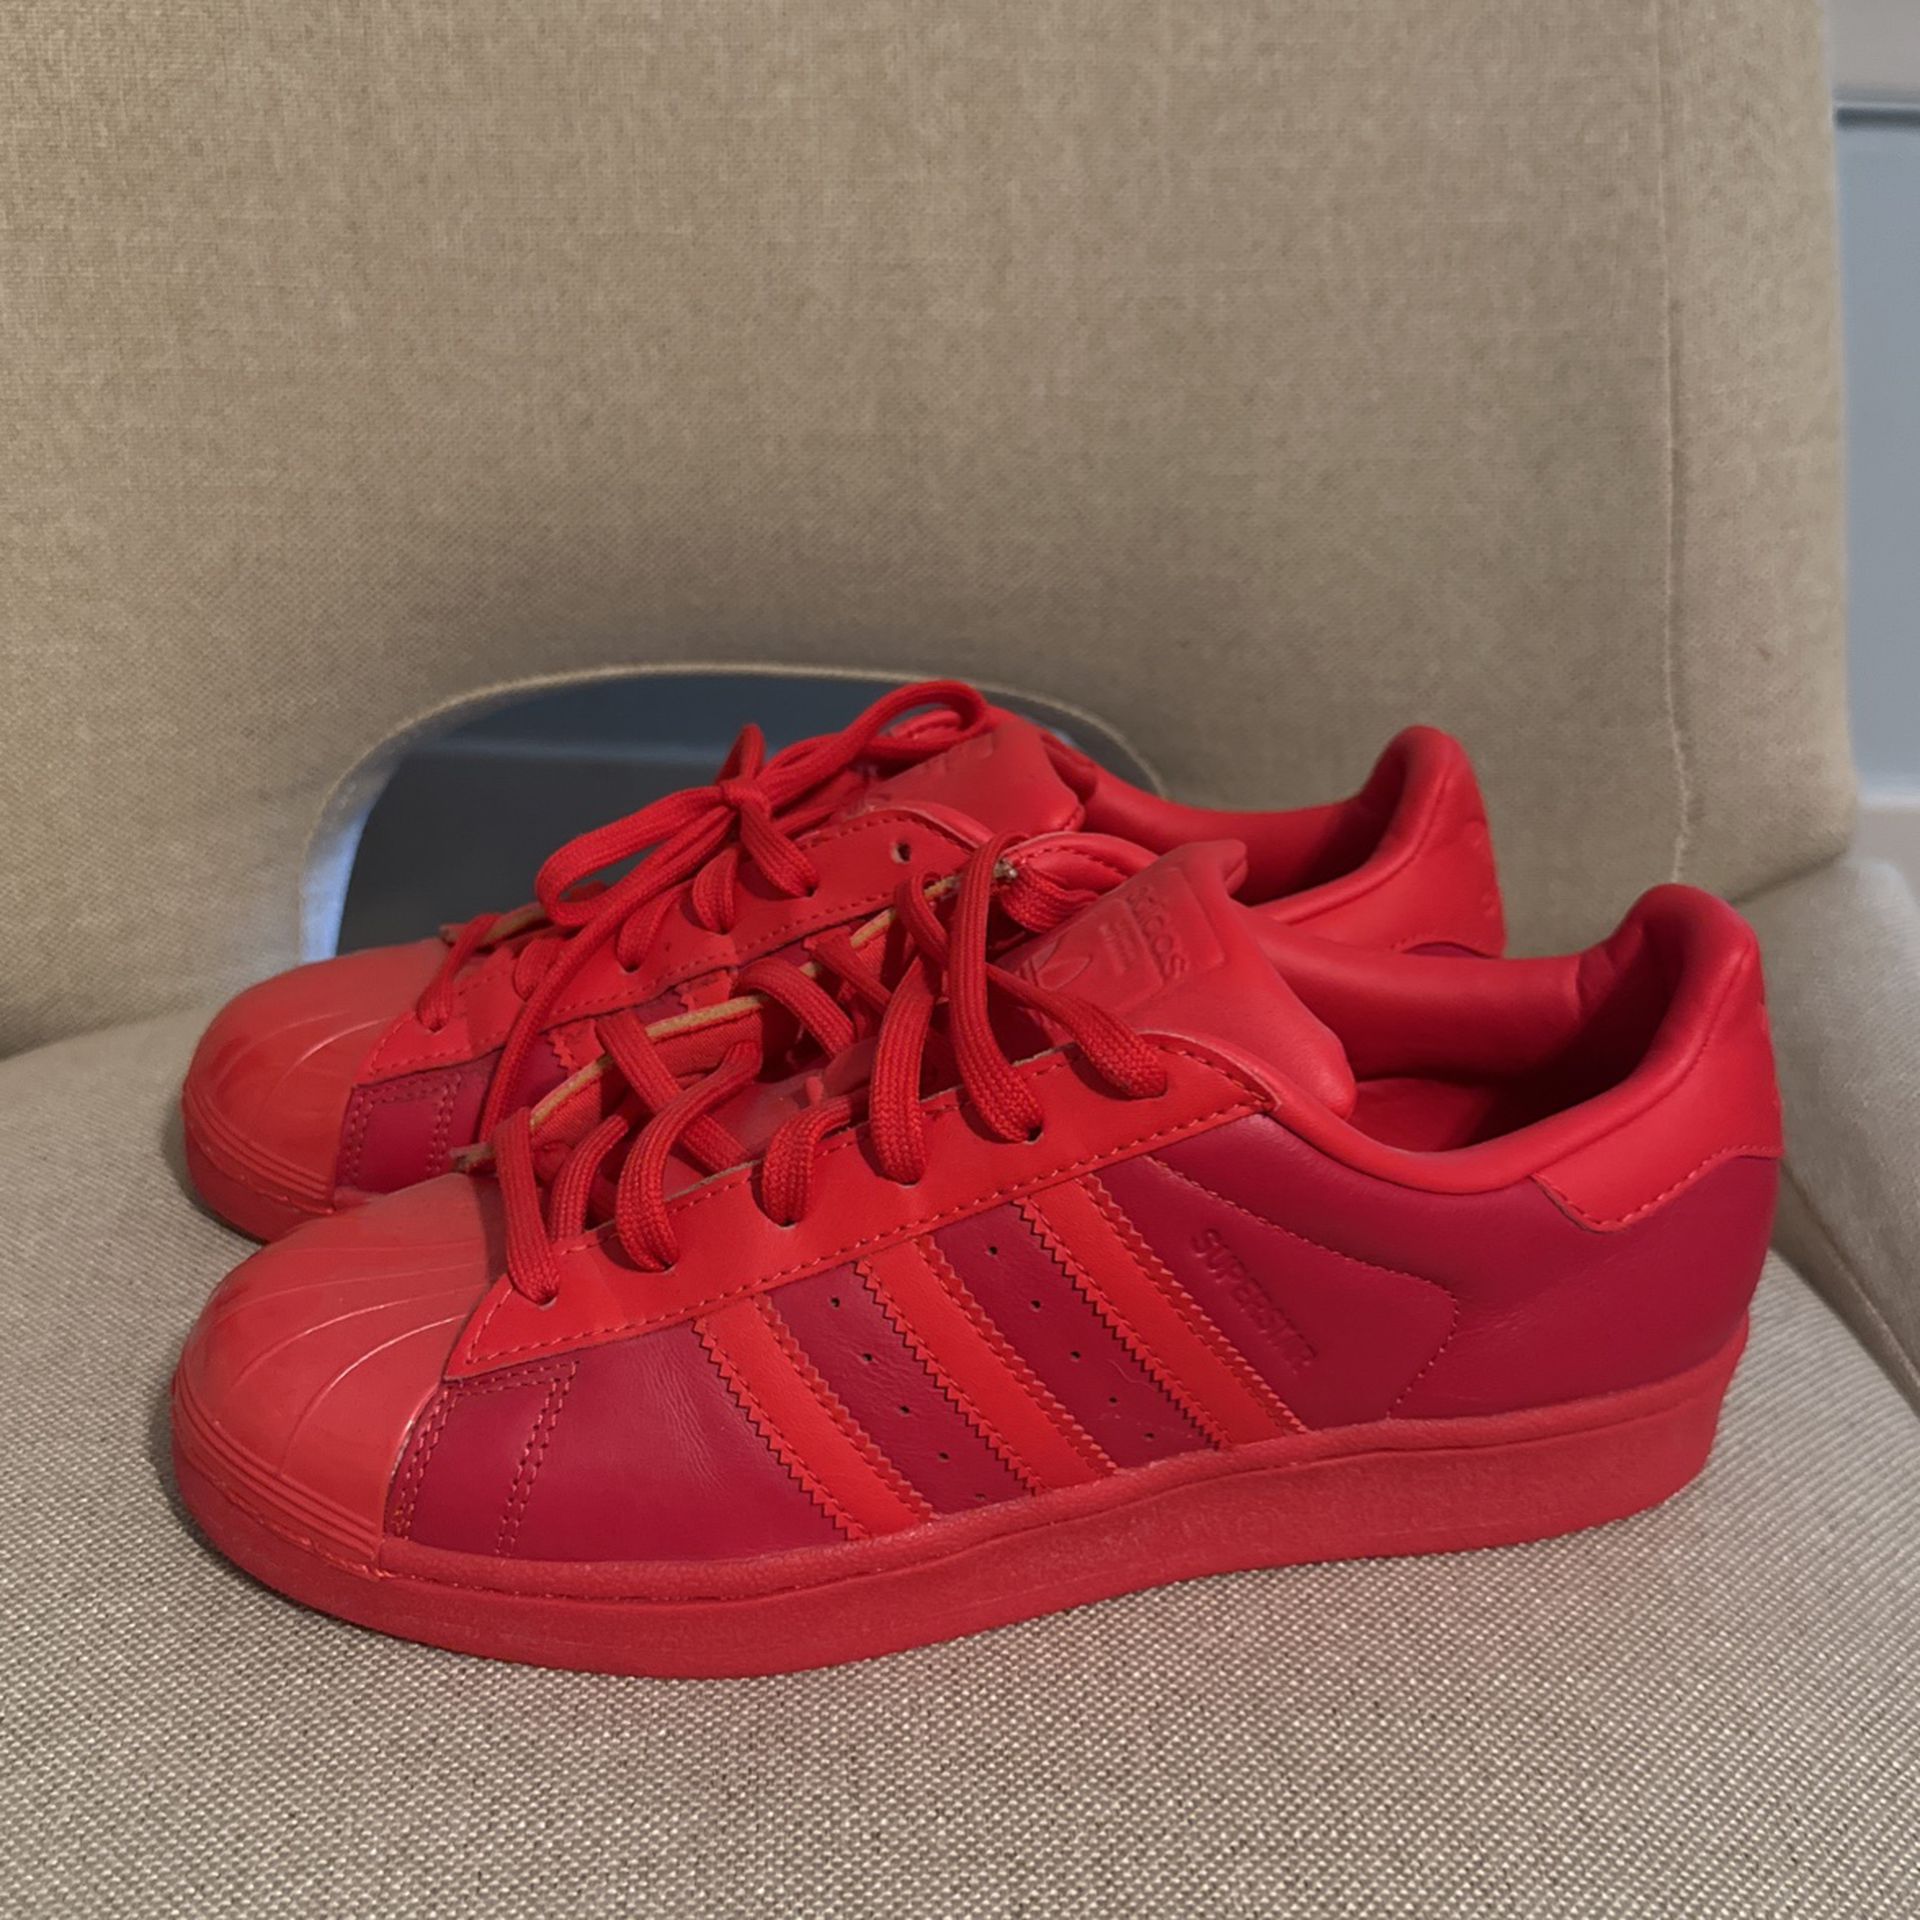 Red Star Adidas Size 7